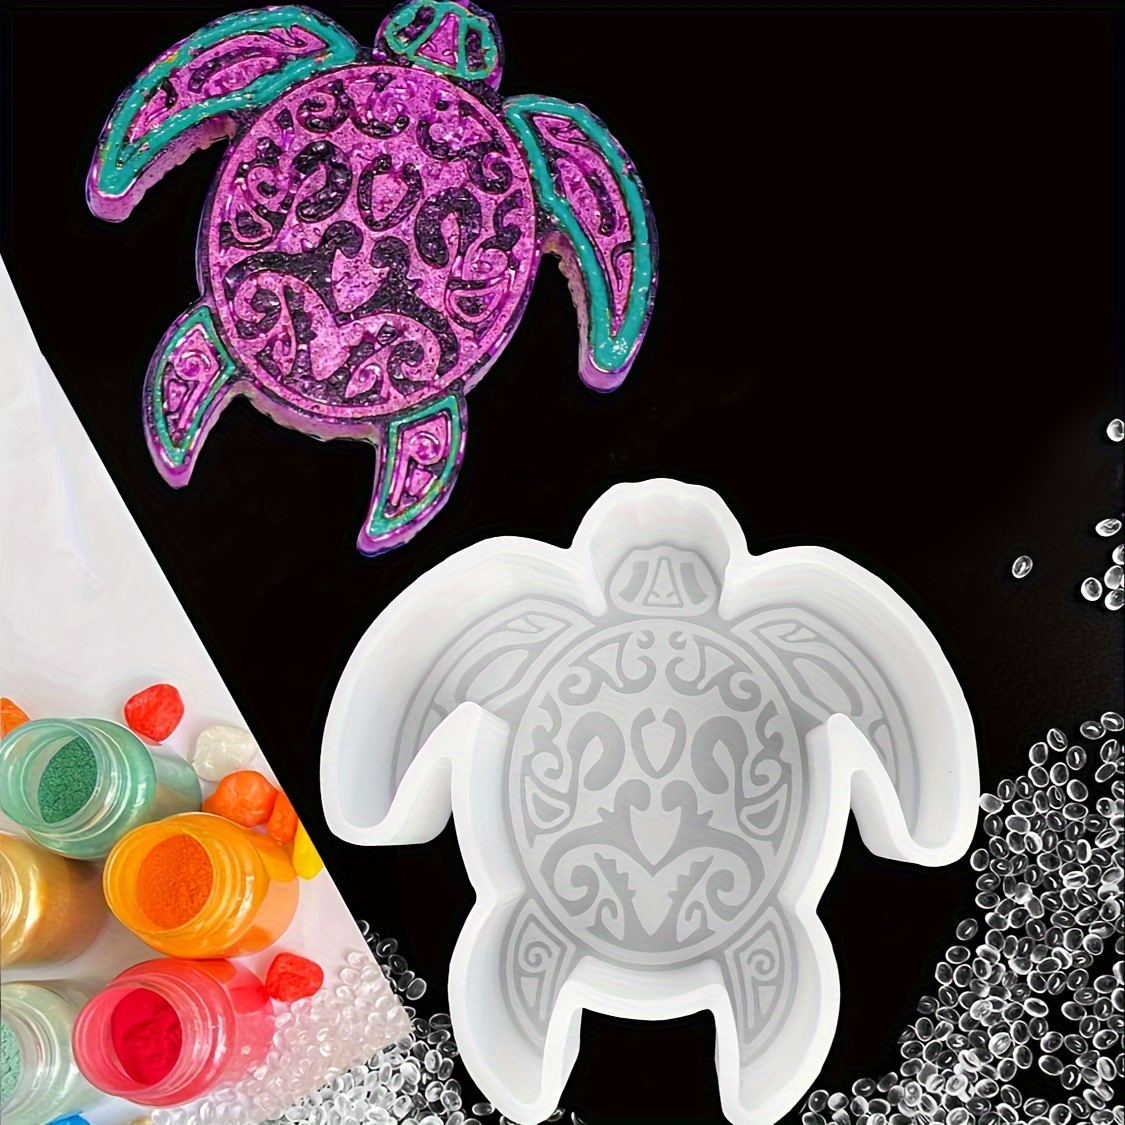 Sea Turtle Silicone Molds For Freshies, Sea Turtle Car Freshie Mold Car  Freshies Supplies Molds Silicone Oven Safe Making Kit For Freshies Resin  Soap